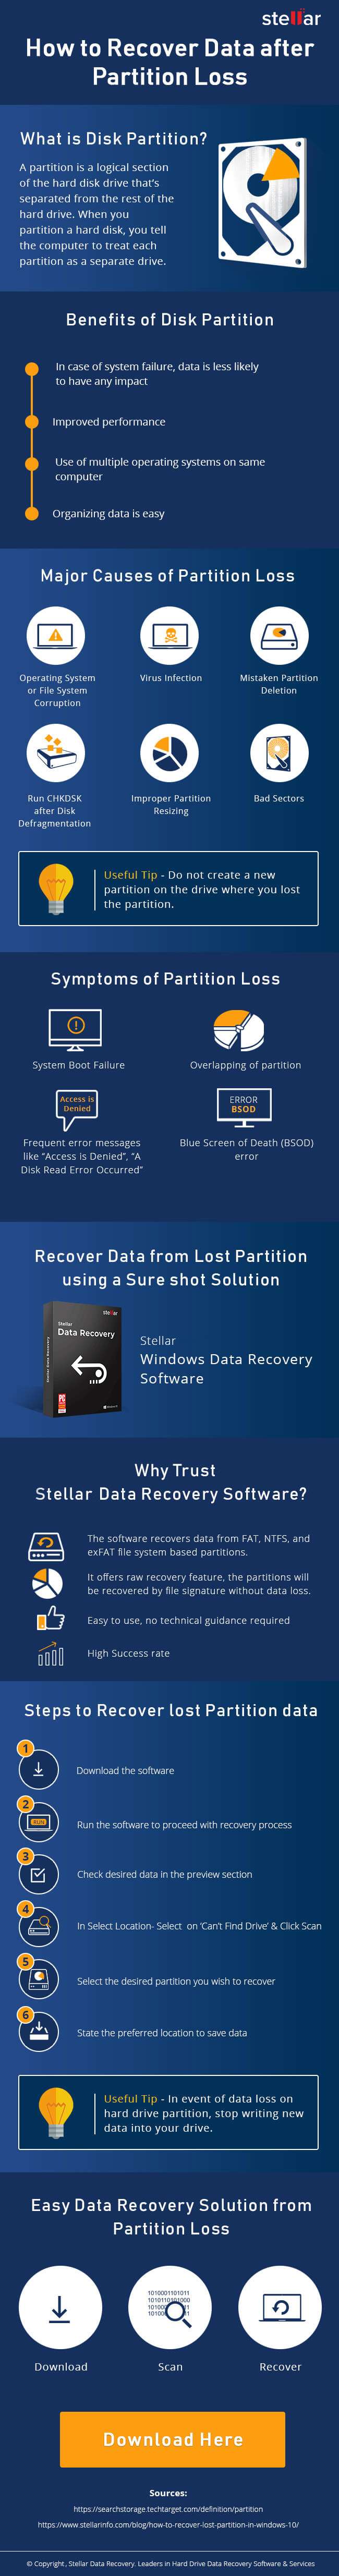 How to Recover Data from Deleted Partition